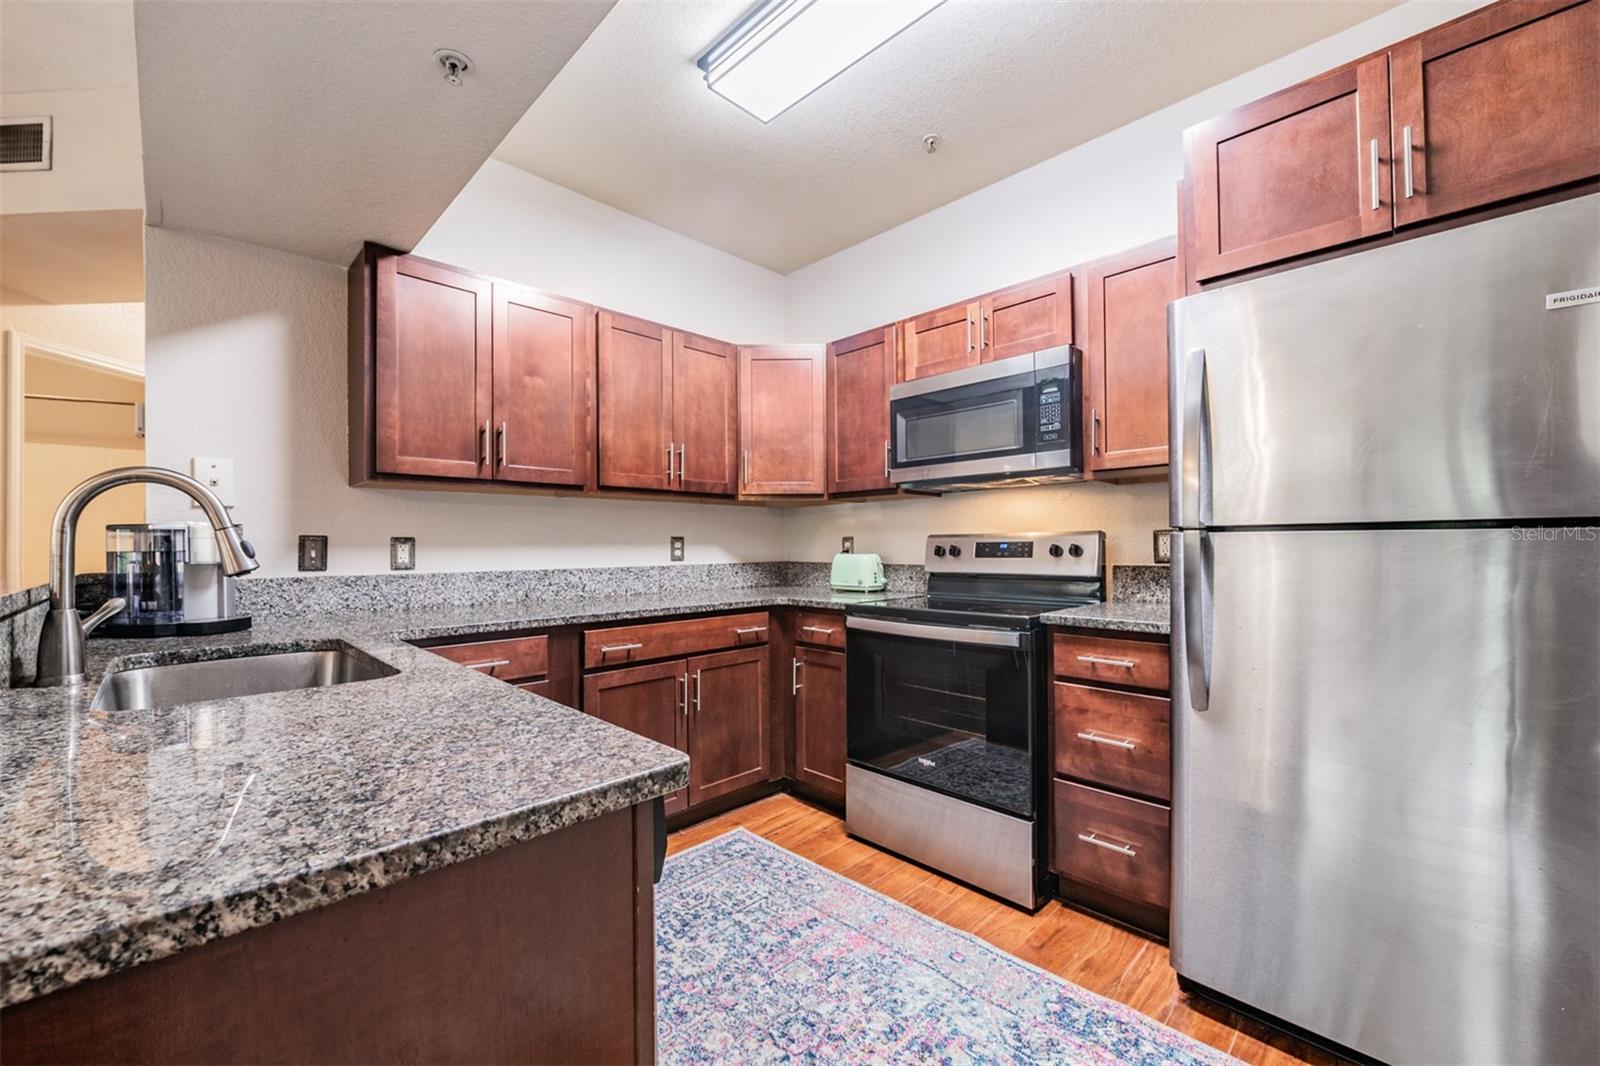 Updated Kitchen, New Stainless Steel Appliances, Granite Countertops.